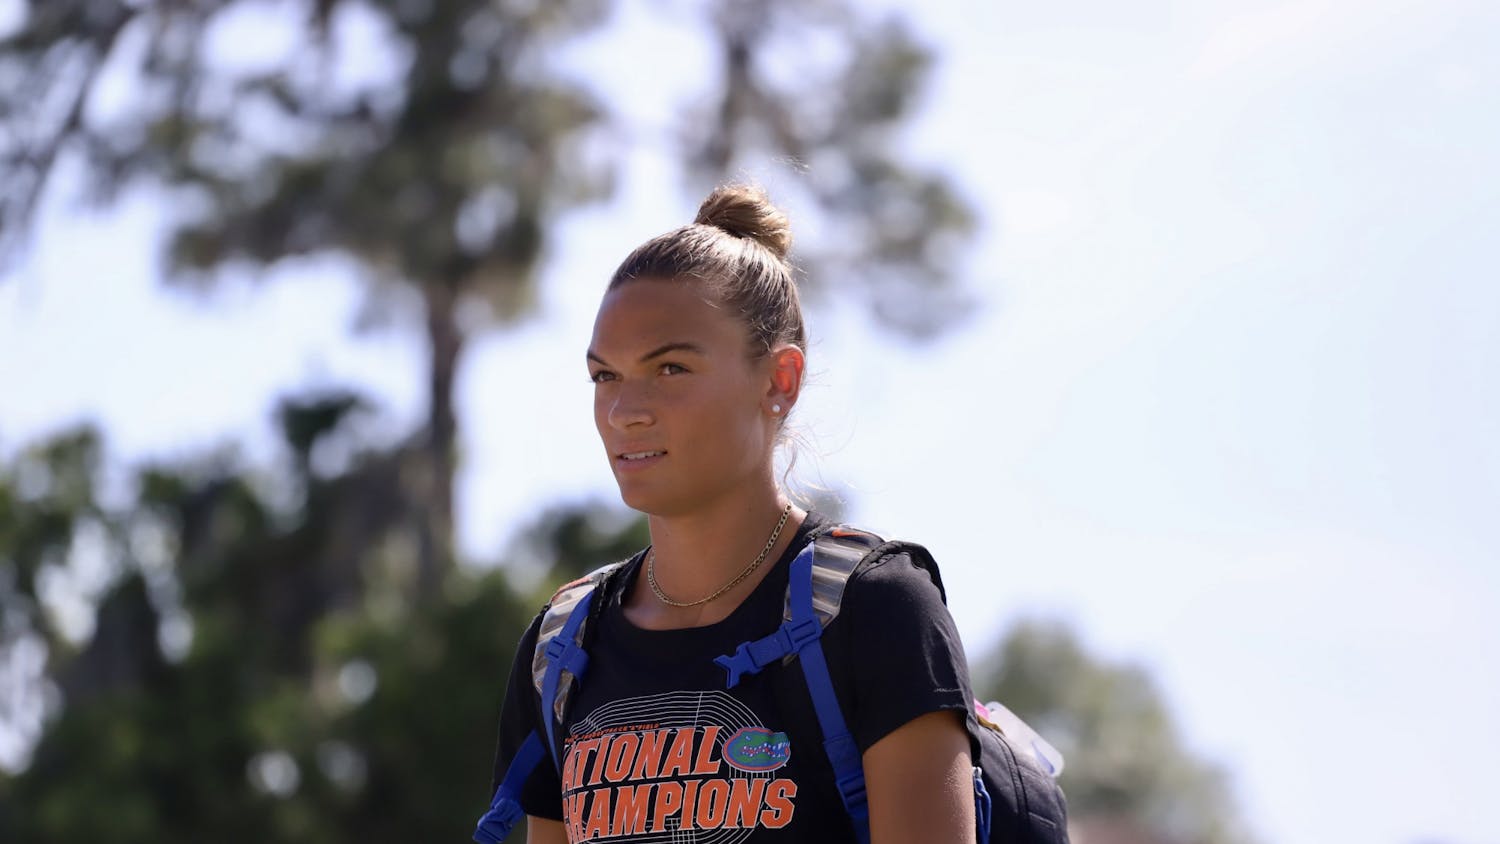 Florida Heptathlete Anna Hall qualified for Team USA on Saturday with her performance at the USATF Combined Championships.